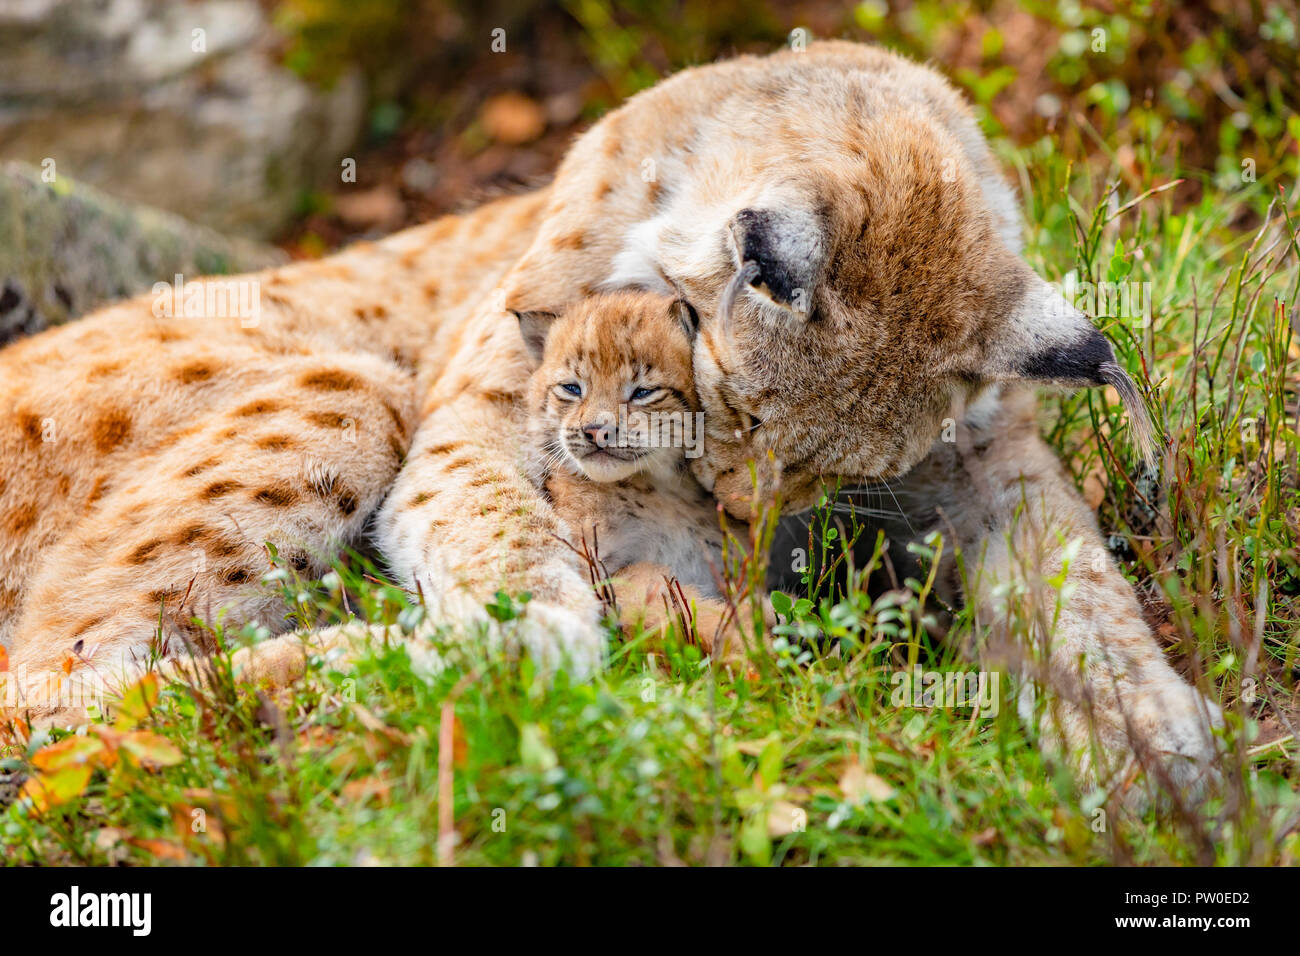 Caring lynx mother and her cute young cub in the grass Stock Photo